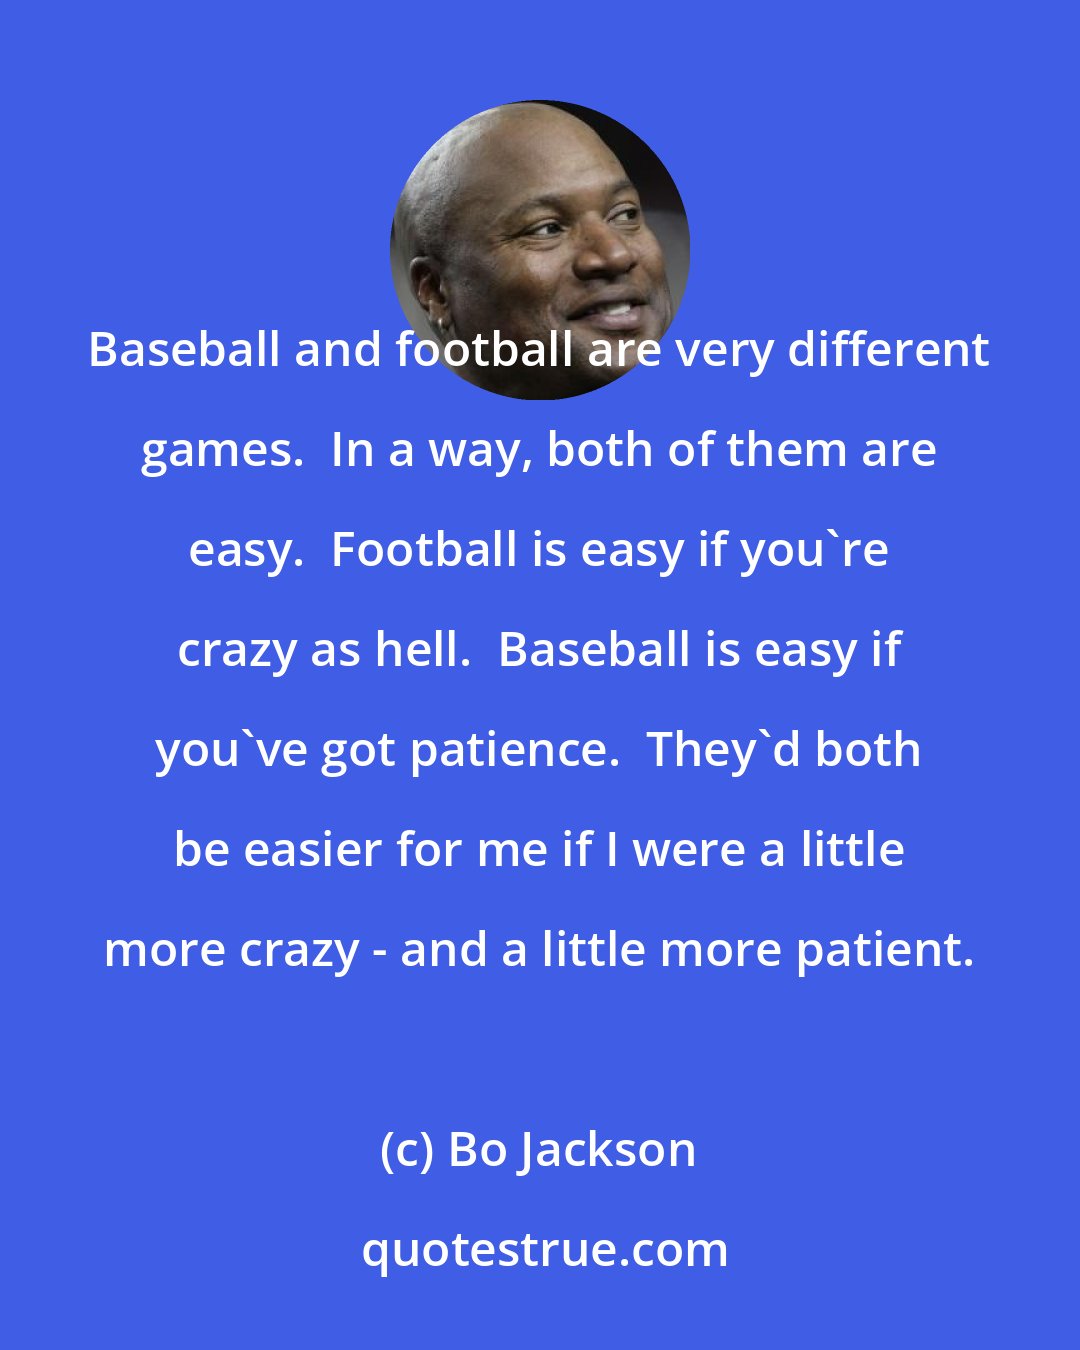 Bo Jackson: Baseball and football are very different games.  In a way, both of them are easy.  Football is easy if you're crazy as hell.  Baseball is easy if you've got patience.  They'd both be easier for me if I were a little more crazy - and a little more patient.